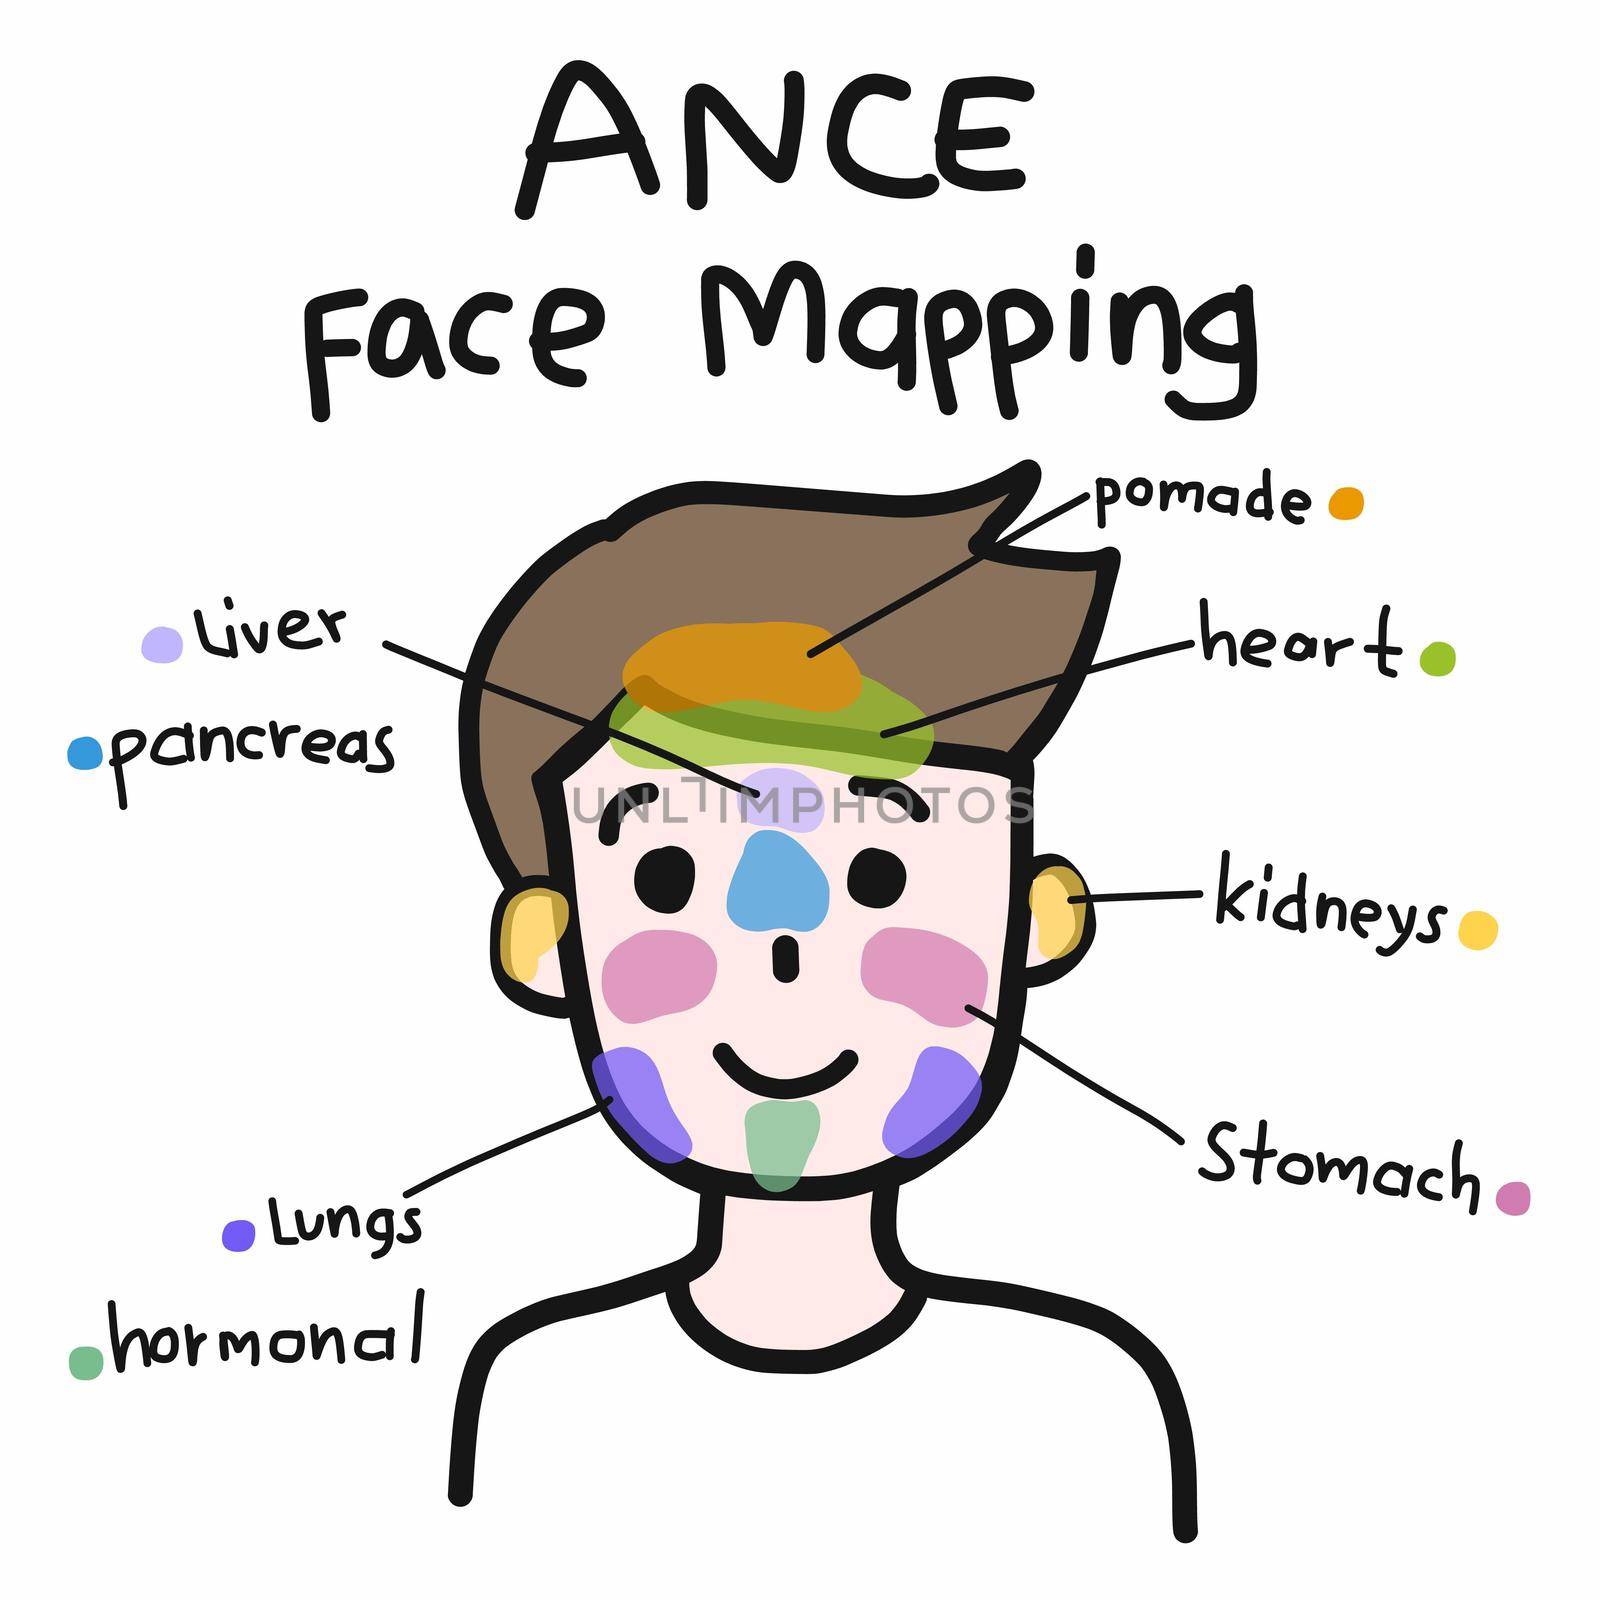 Face mapping for acne , Cute man cartoon face vector illustration by Yoopho